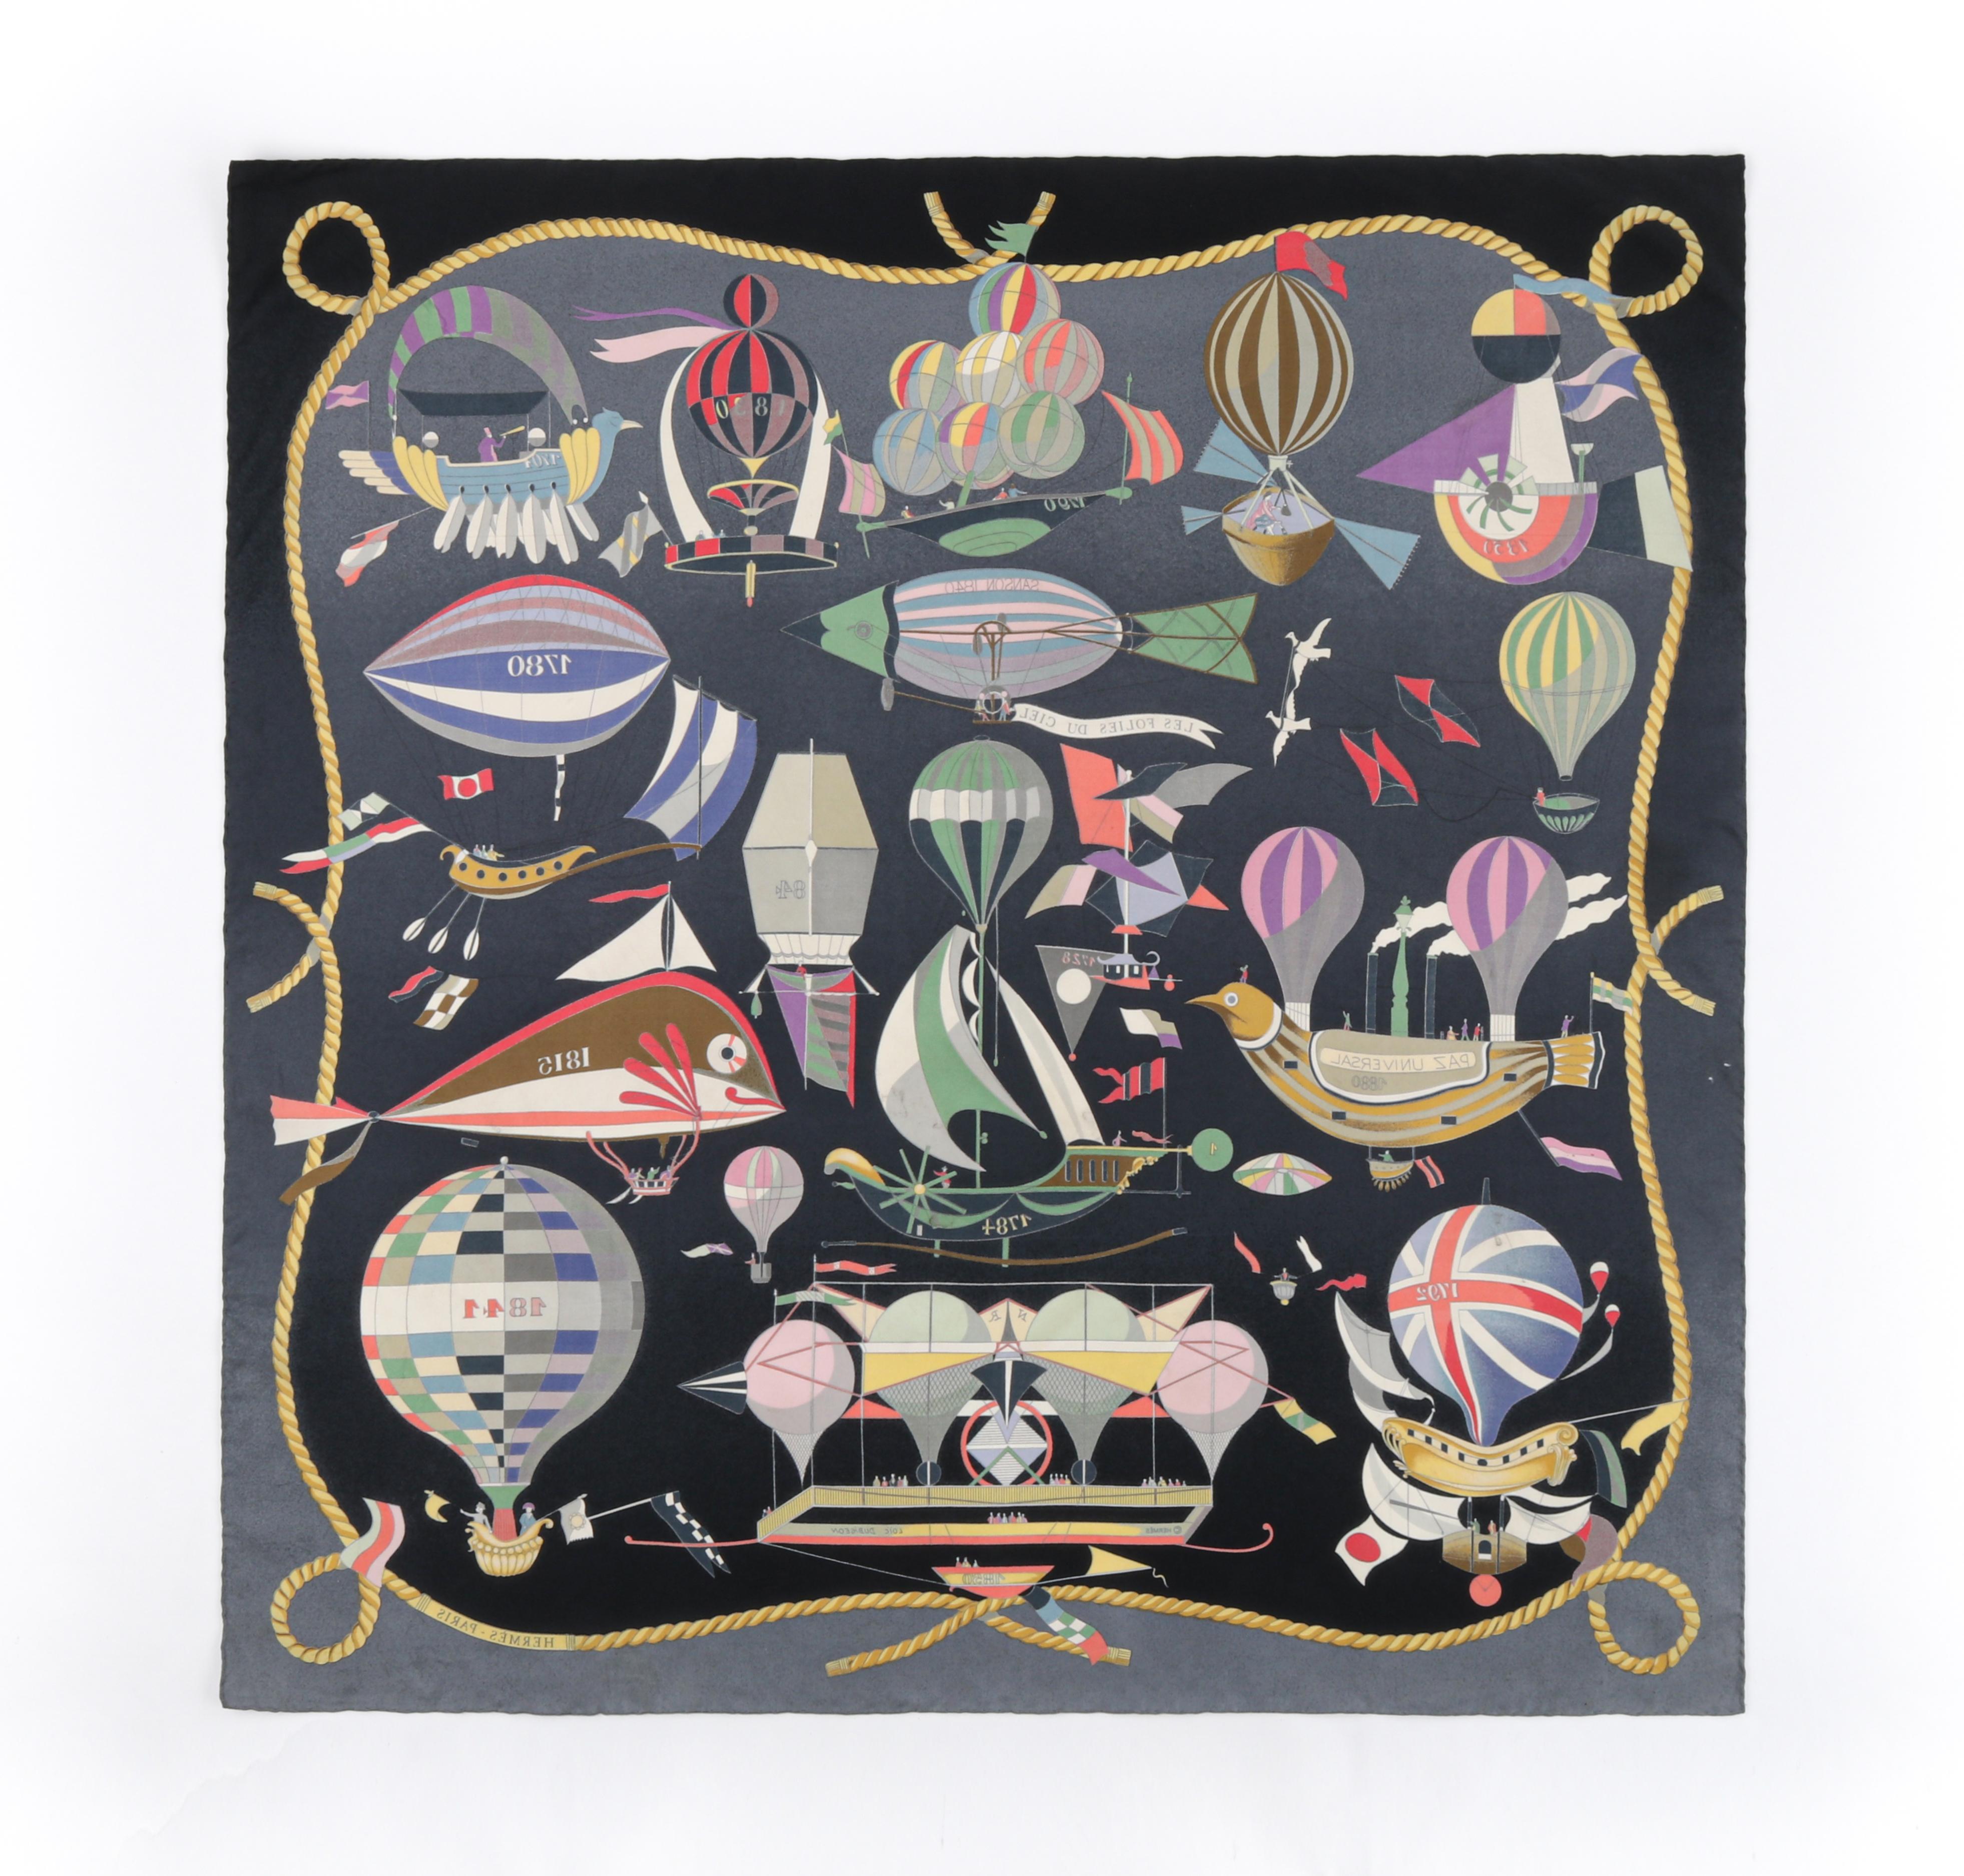 HERMES Loïc Dubigeon “Les Folies Du Ciel” Air Balloon Flying Machine Silk Scarf
 
Brand/Manufacturer: Hermes
Designer: Loic Dubigeon 
Style: Square scarf
Color(s): Shades of blue, yellow, gray, pink, green, white, purple, red, beige, black
Lined: